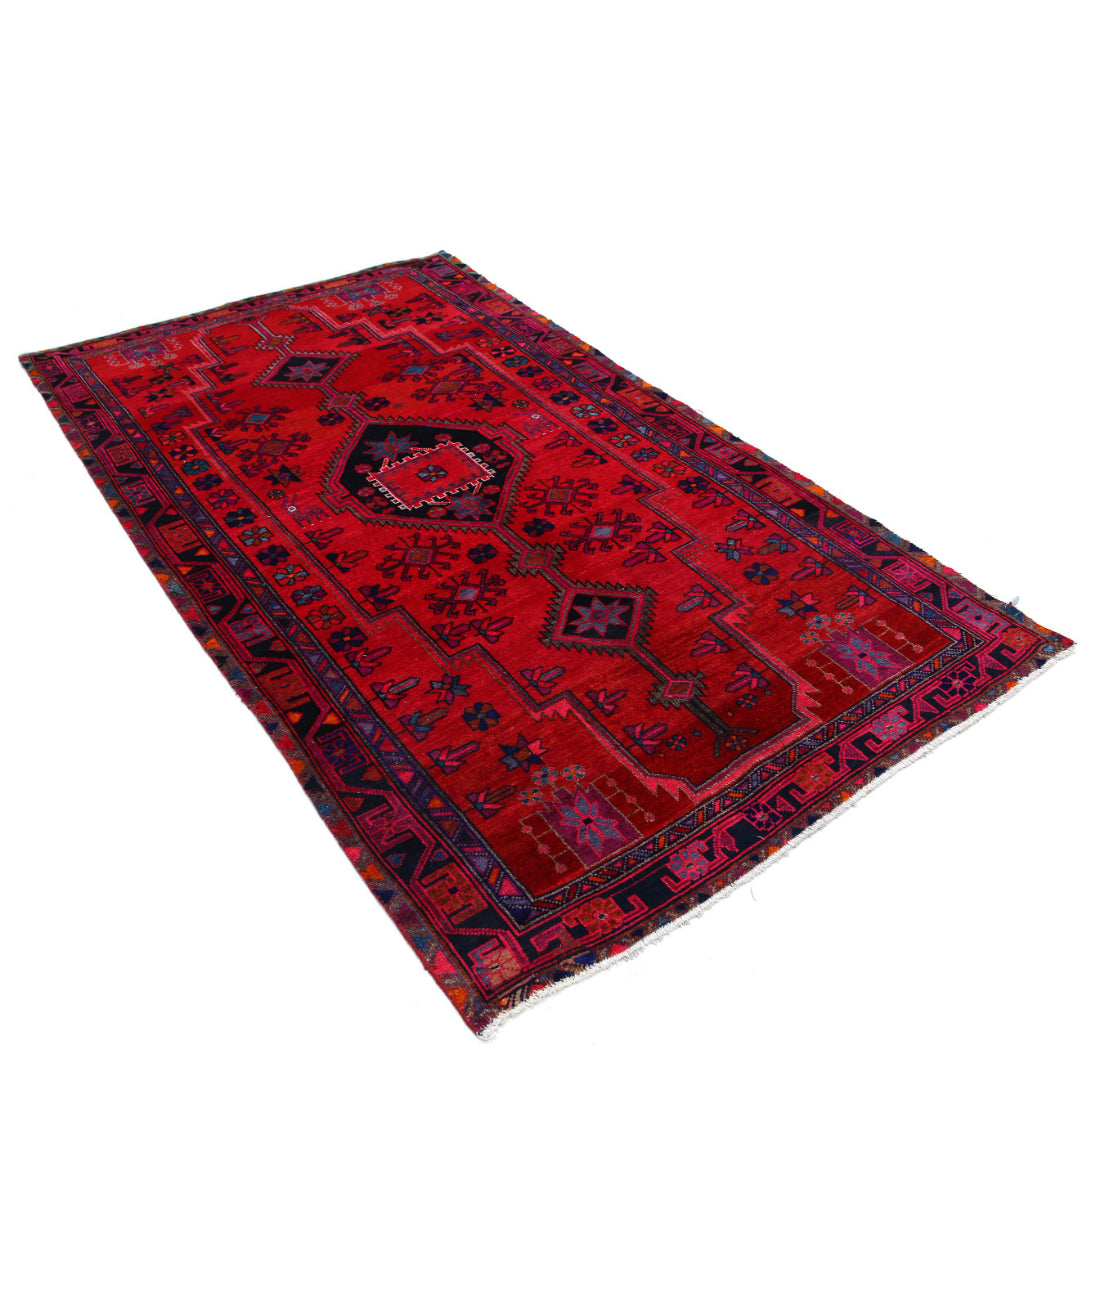 Hand Knotted Persian Hamadan Wool Rug - 4'10'' x 8'9'' 4'10'' x 8'9'' (145 X 263) / Red / Pink